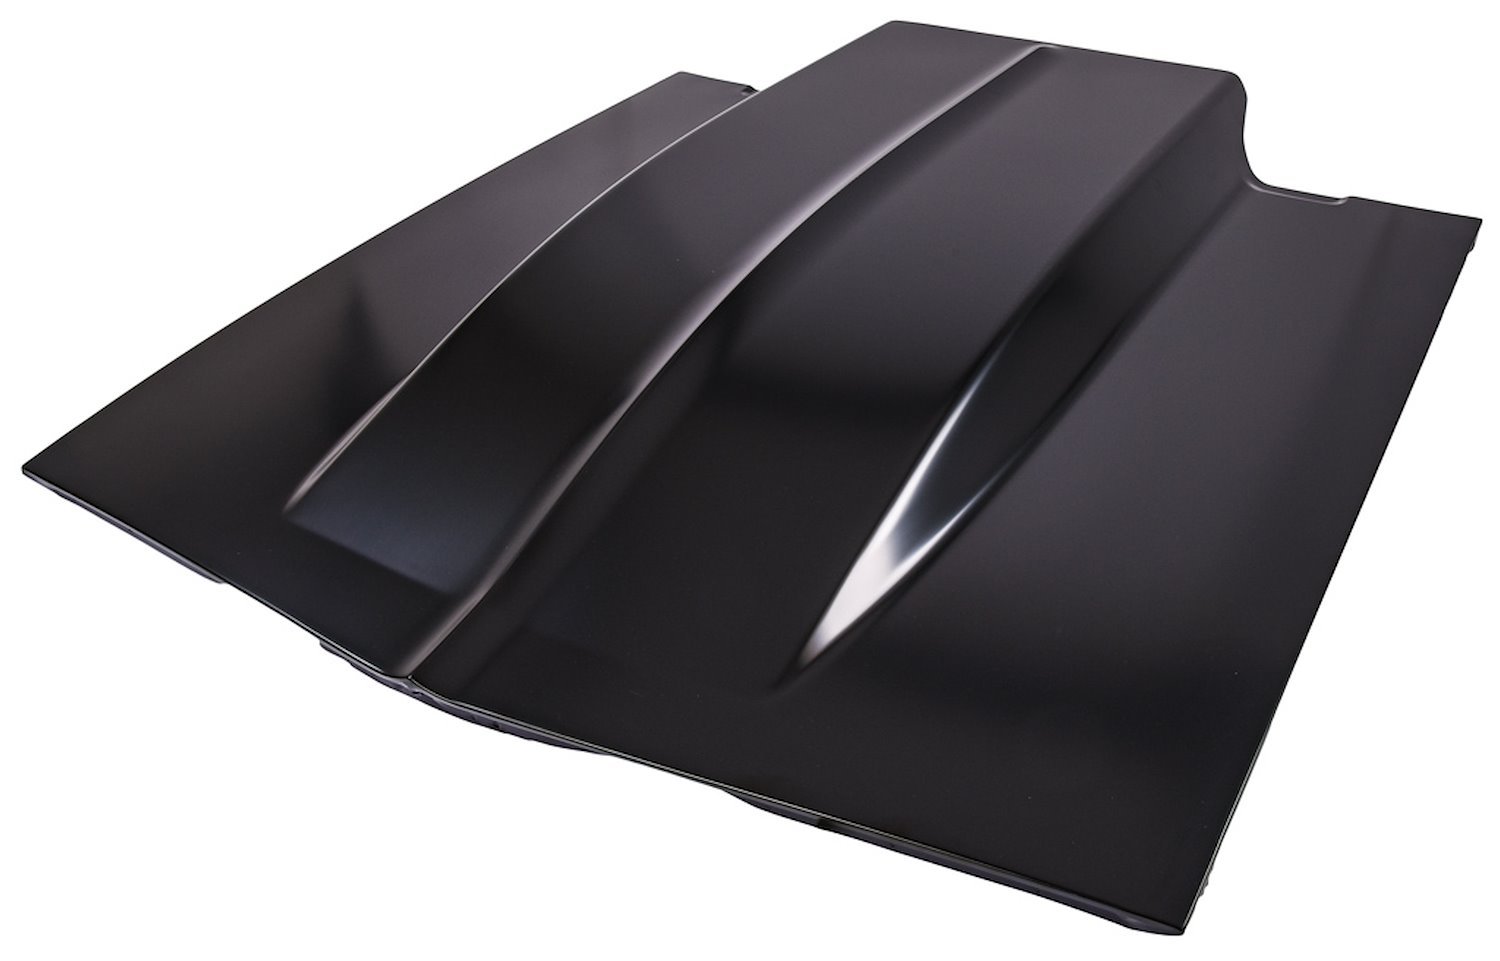 Steel Cowl Induction Hood for 1967-1969 Chevy Camaro [4 in. Cowl Induction Scoop]